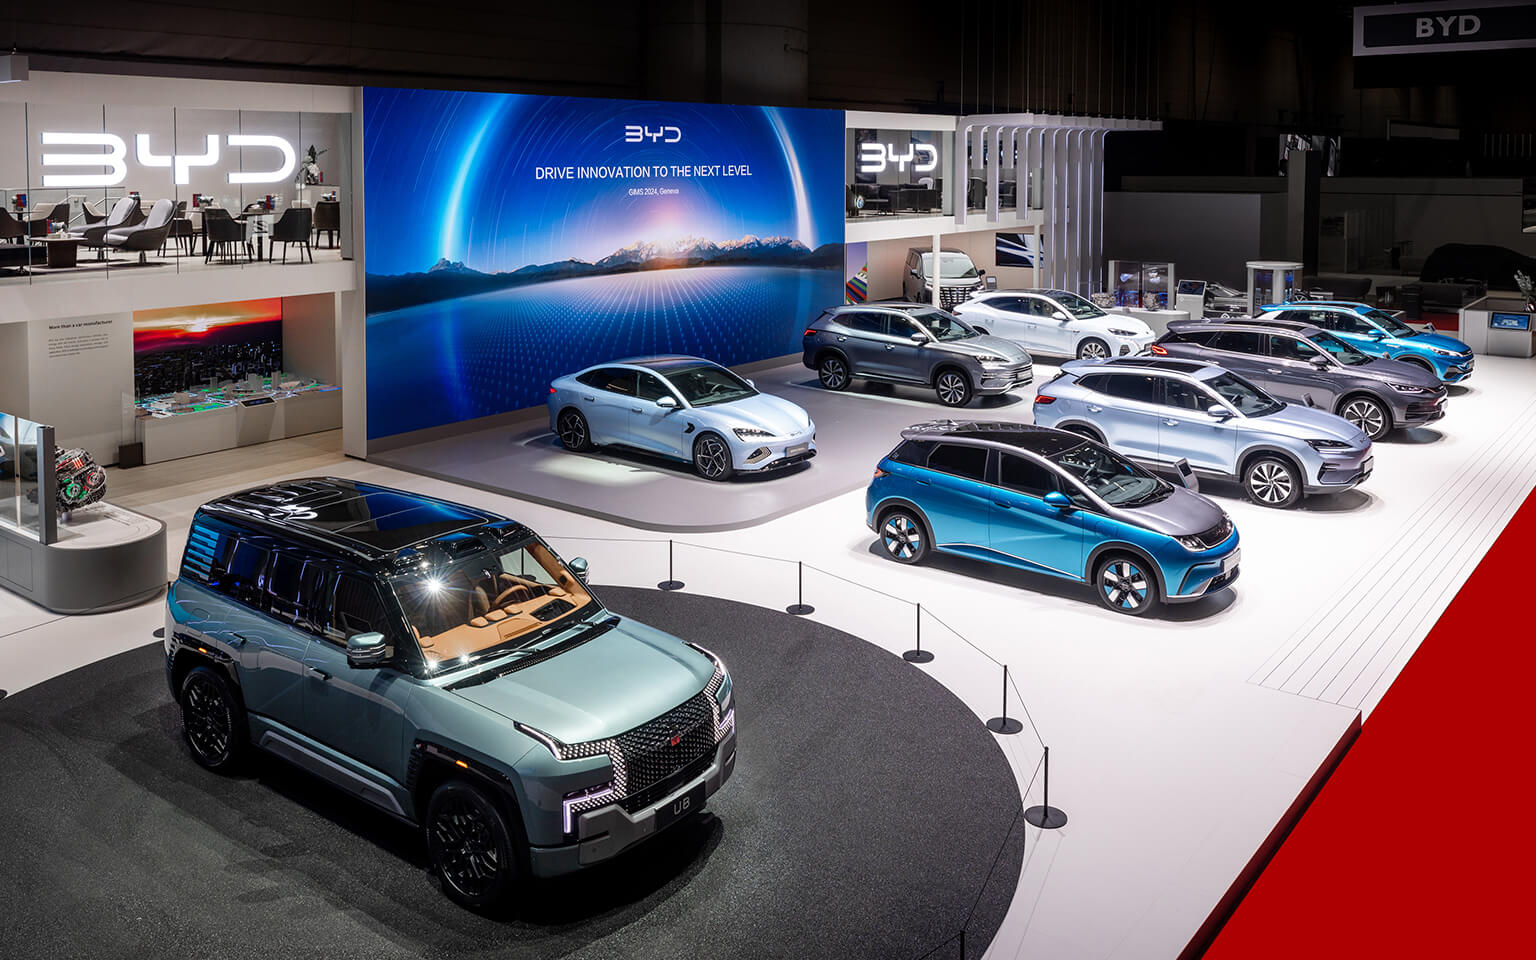 Display International is once again realising the exhibition stand of Chinese car manufacturer BYD at the Geneva Motor Show.